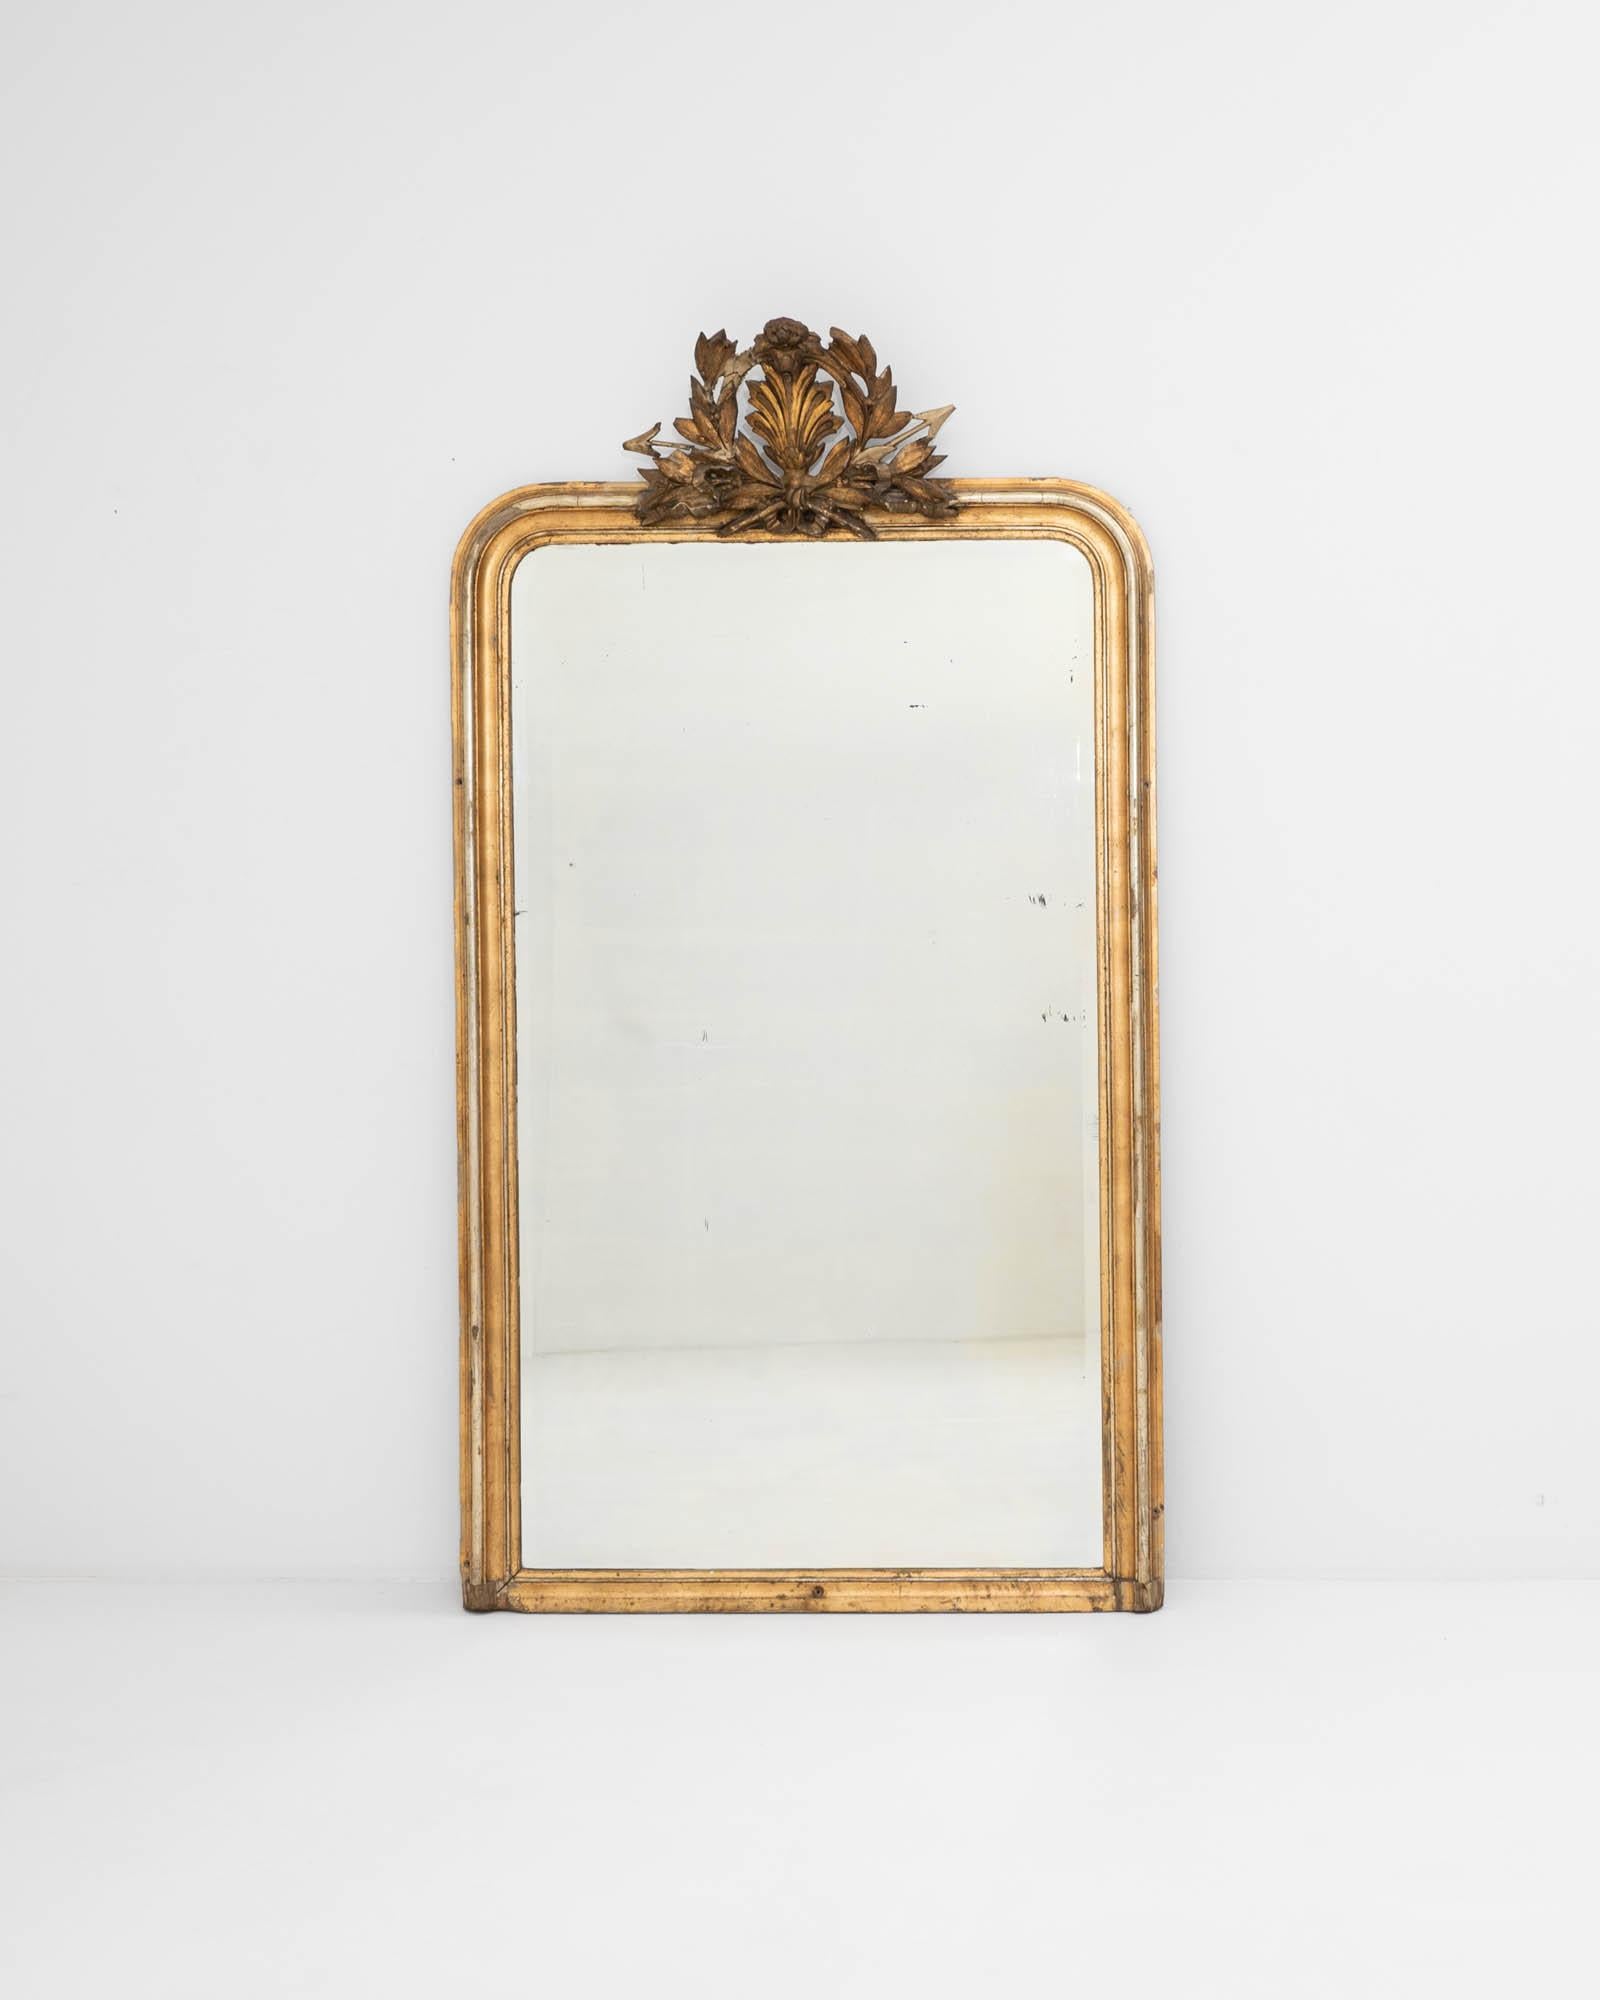 Crafted in 19th-century France, this magnificent Louis Philippe mirror flaunts a gilded frame that artfully combines smoothly rounded top corners with squared-off bottom corners. This design imparts a sense of balanced geometry, making the mirror a